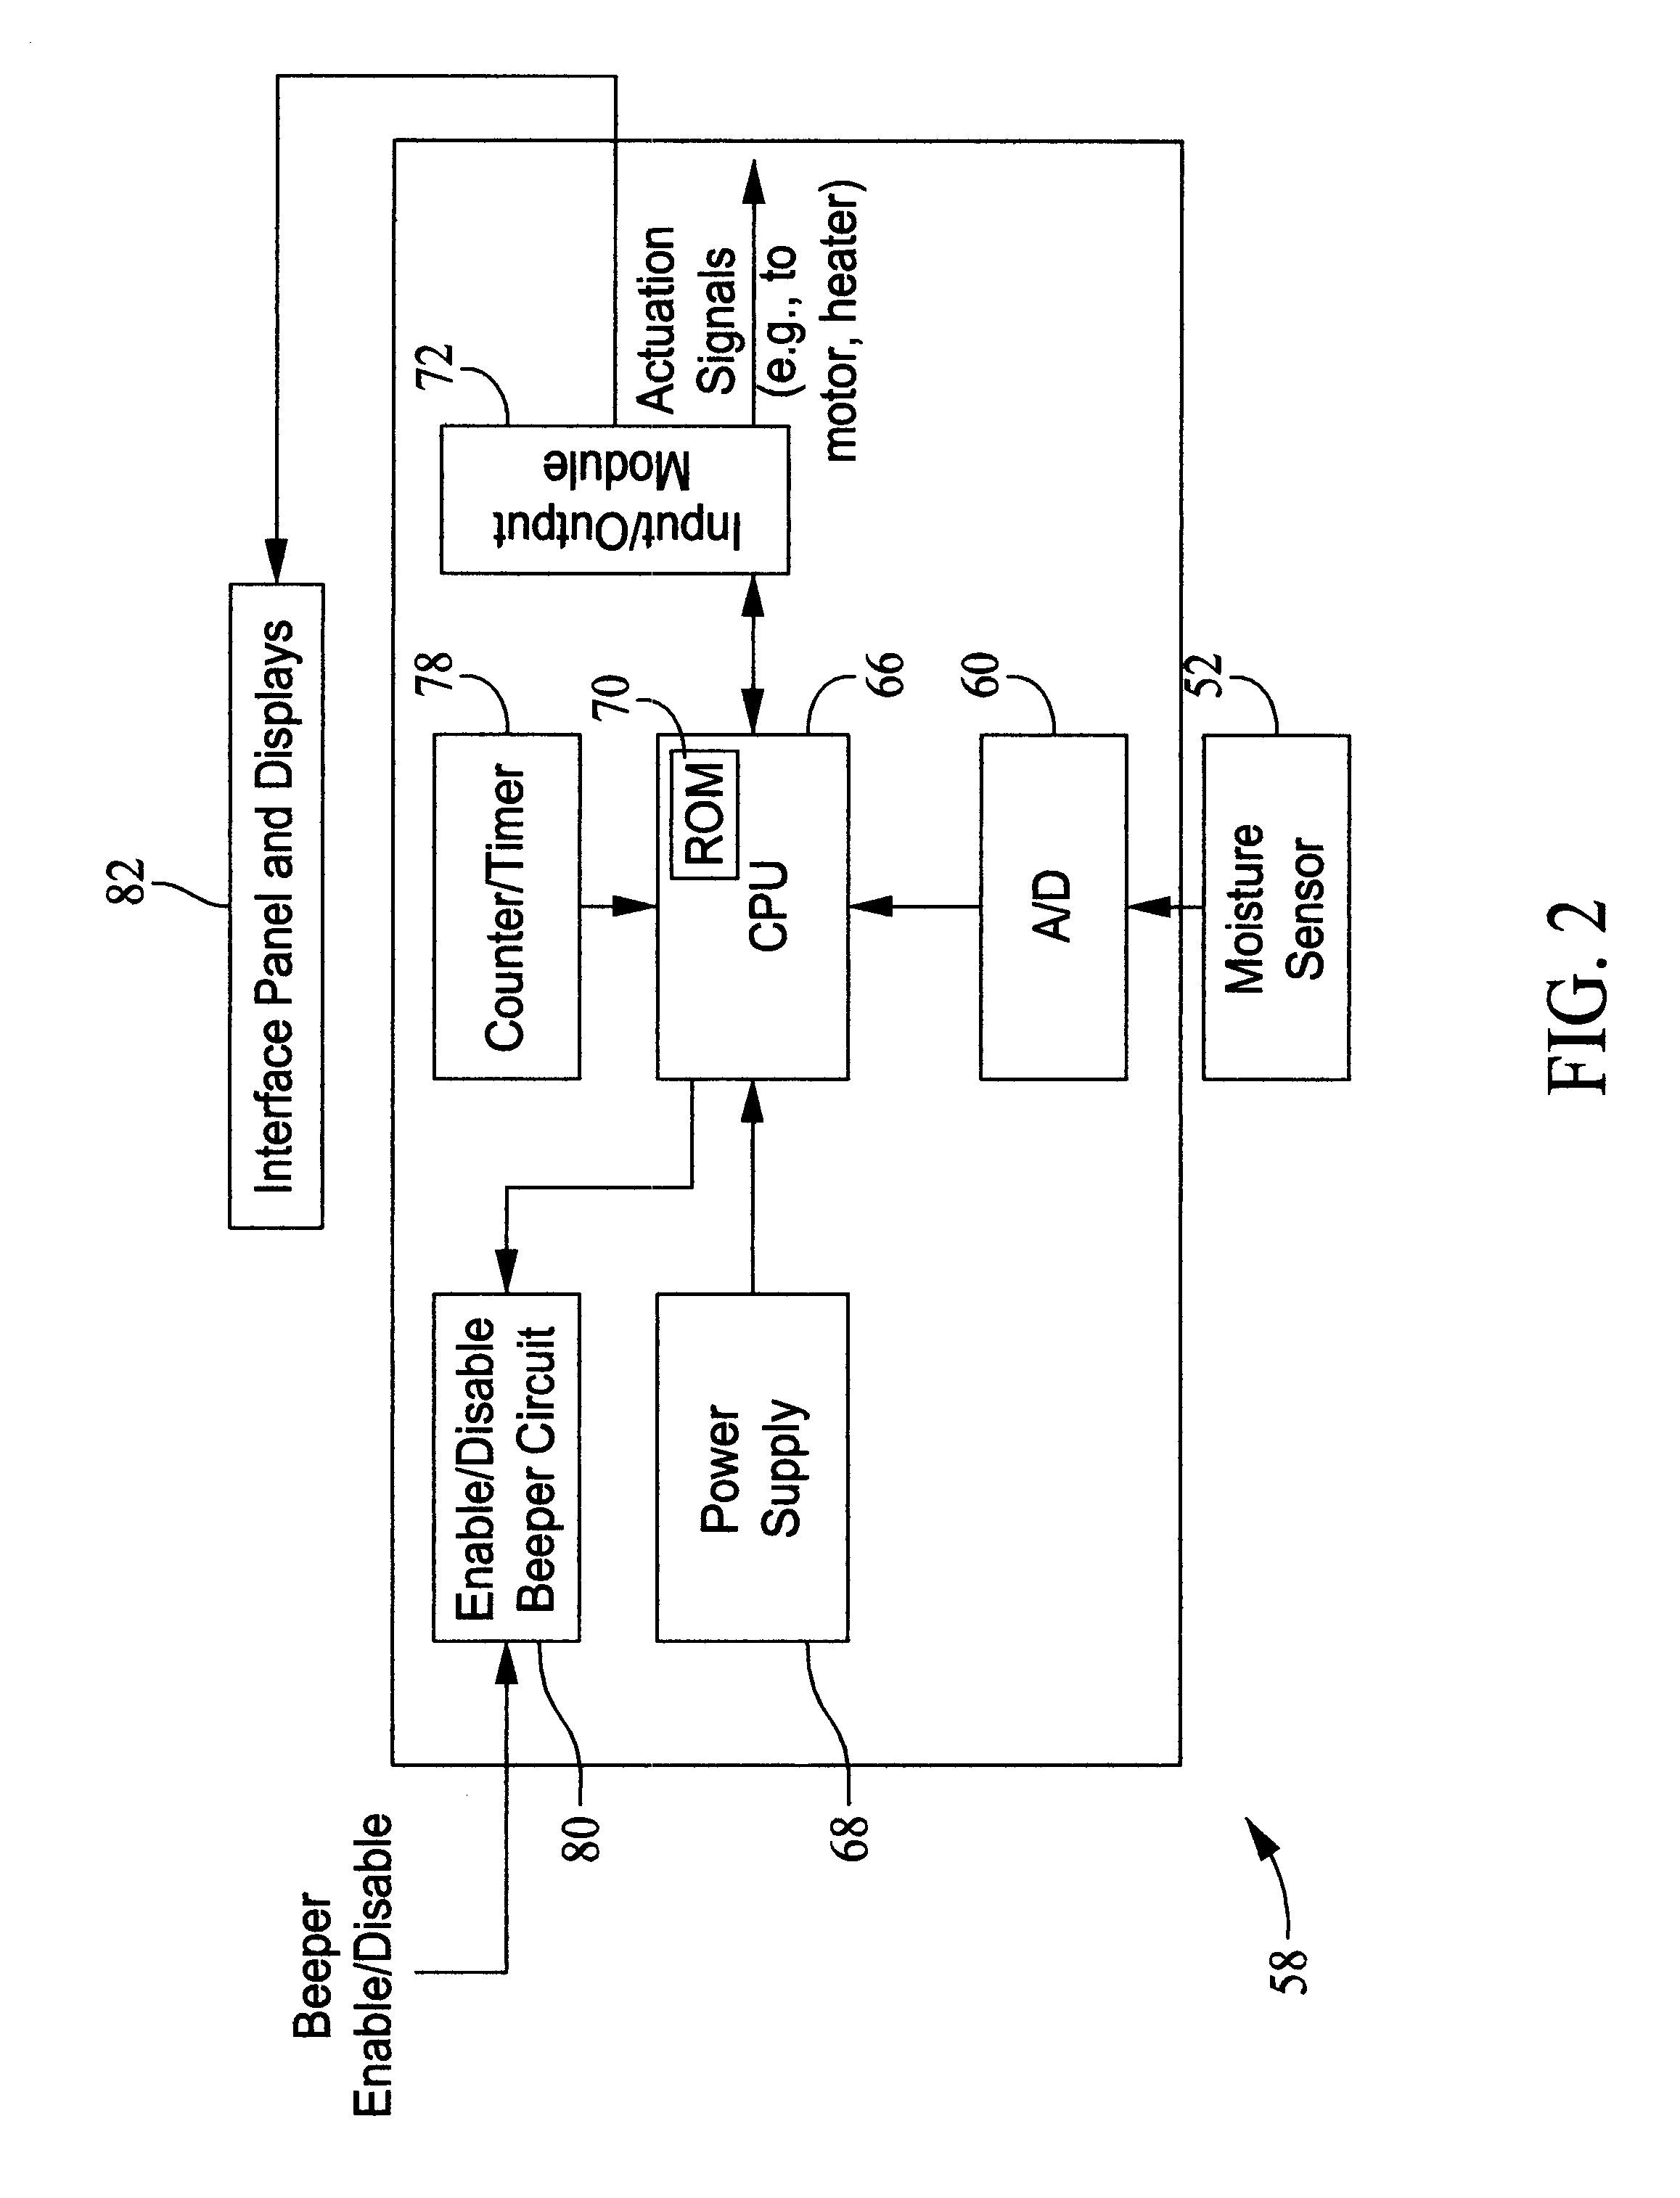 System and method for controlling a dryer appliance